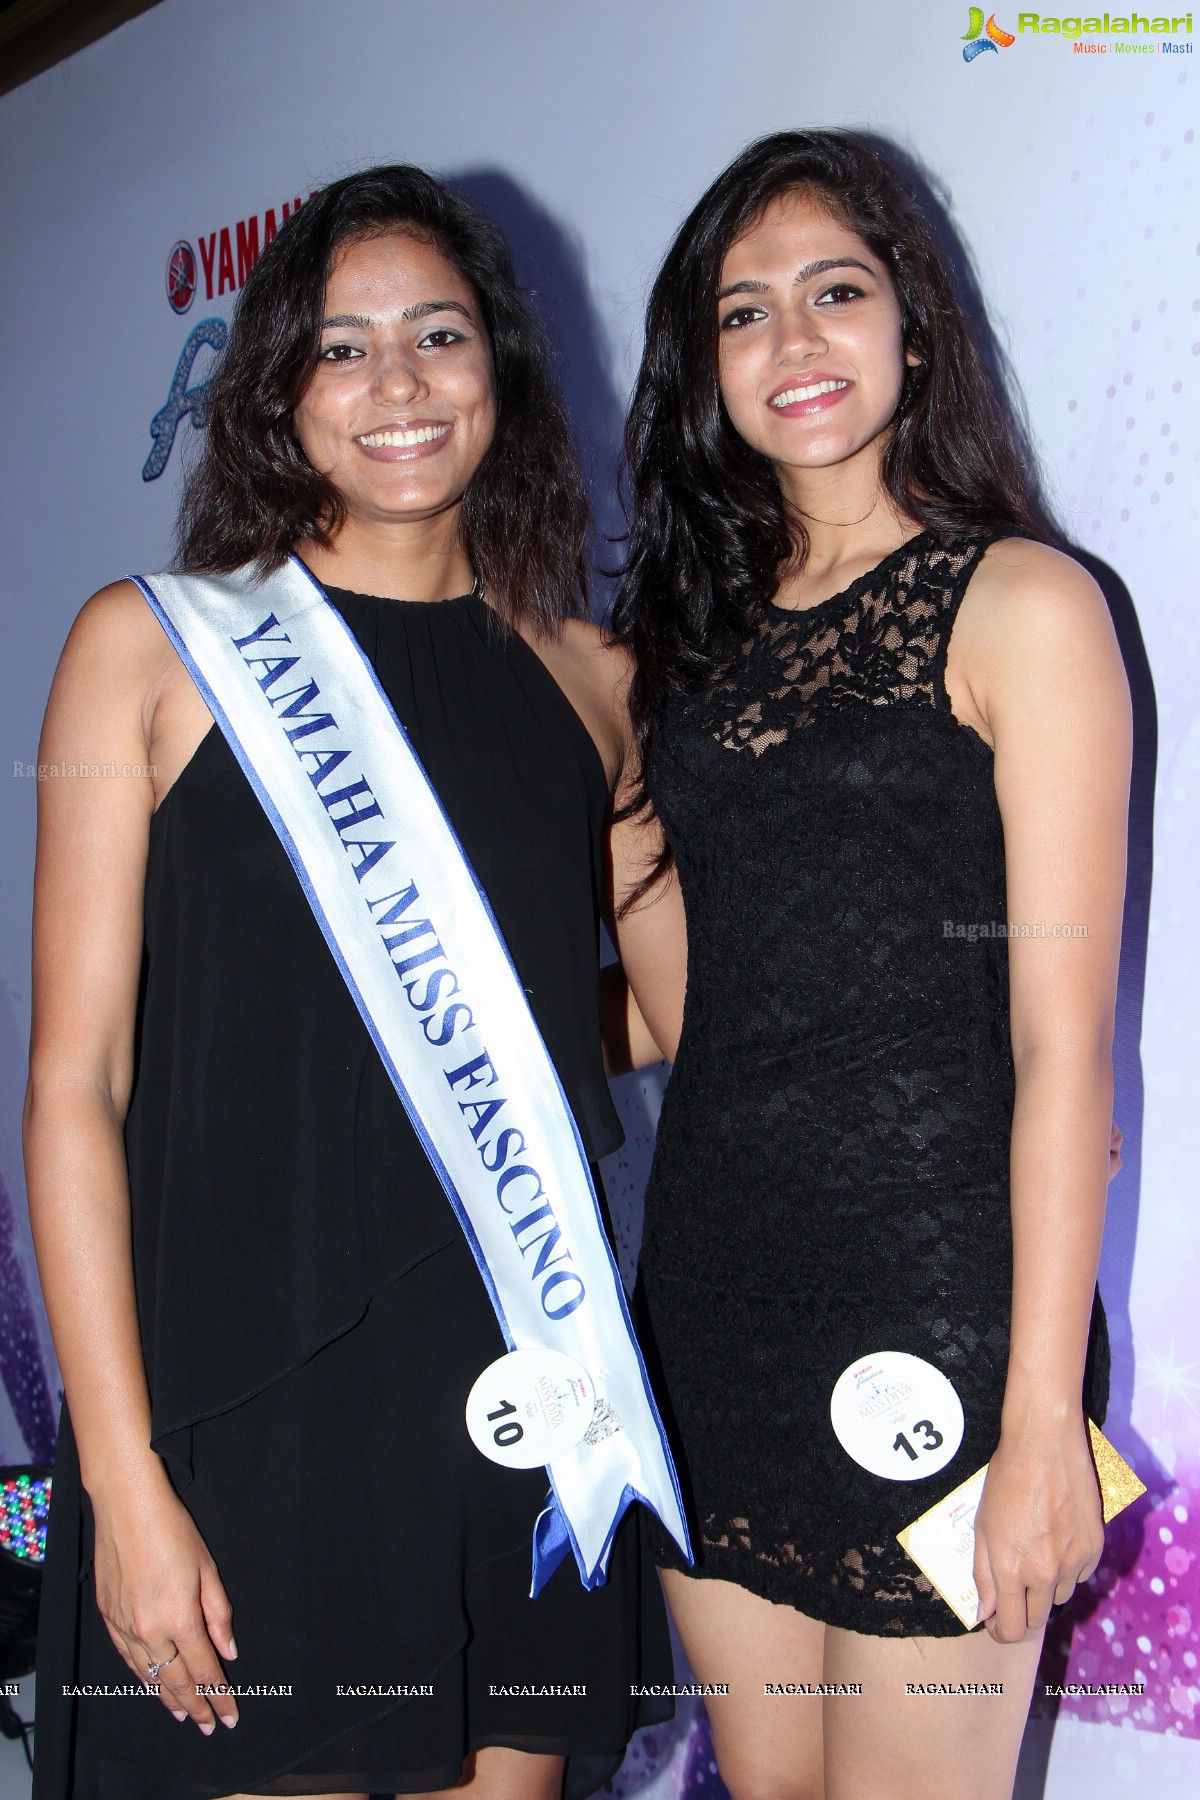 Hyderabad Auditions of Miss Diva - Miss Universe India 2016 at The Park, Hyderabad